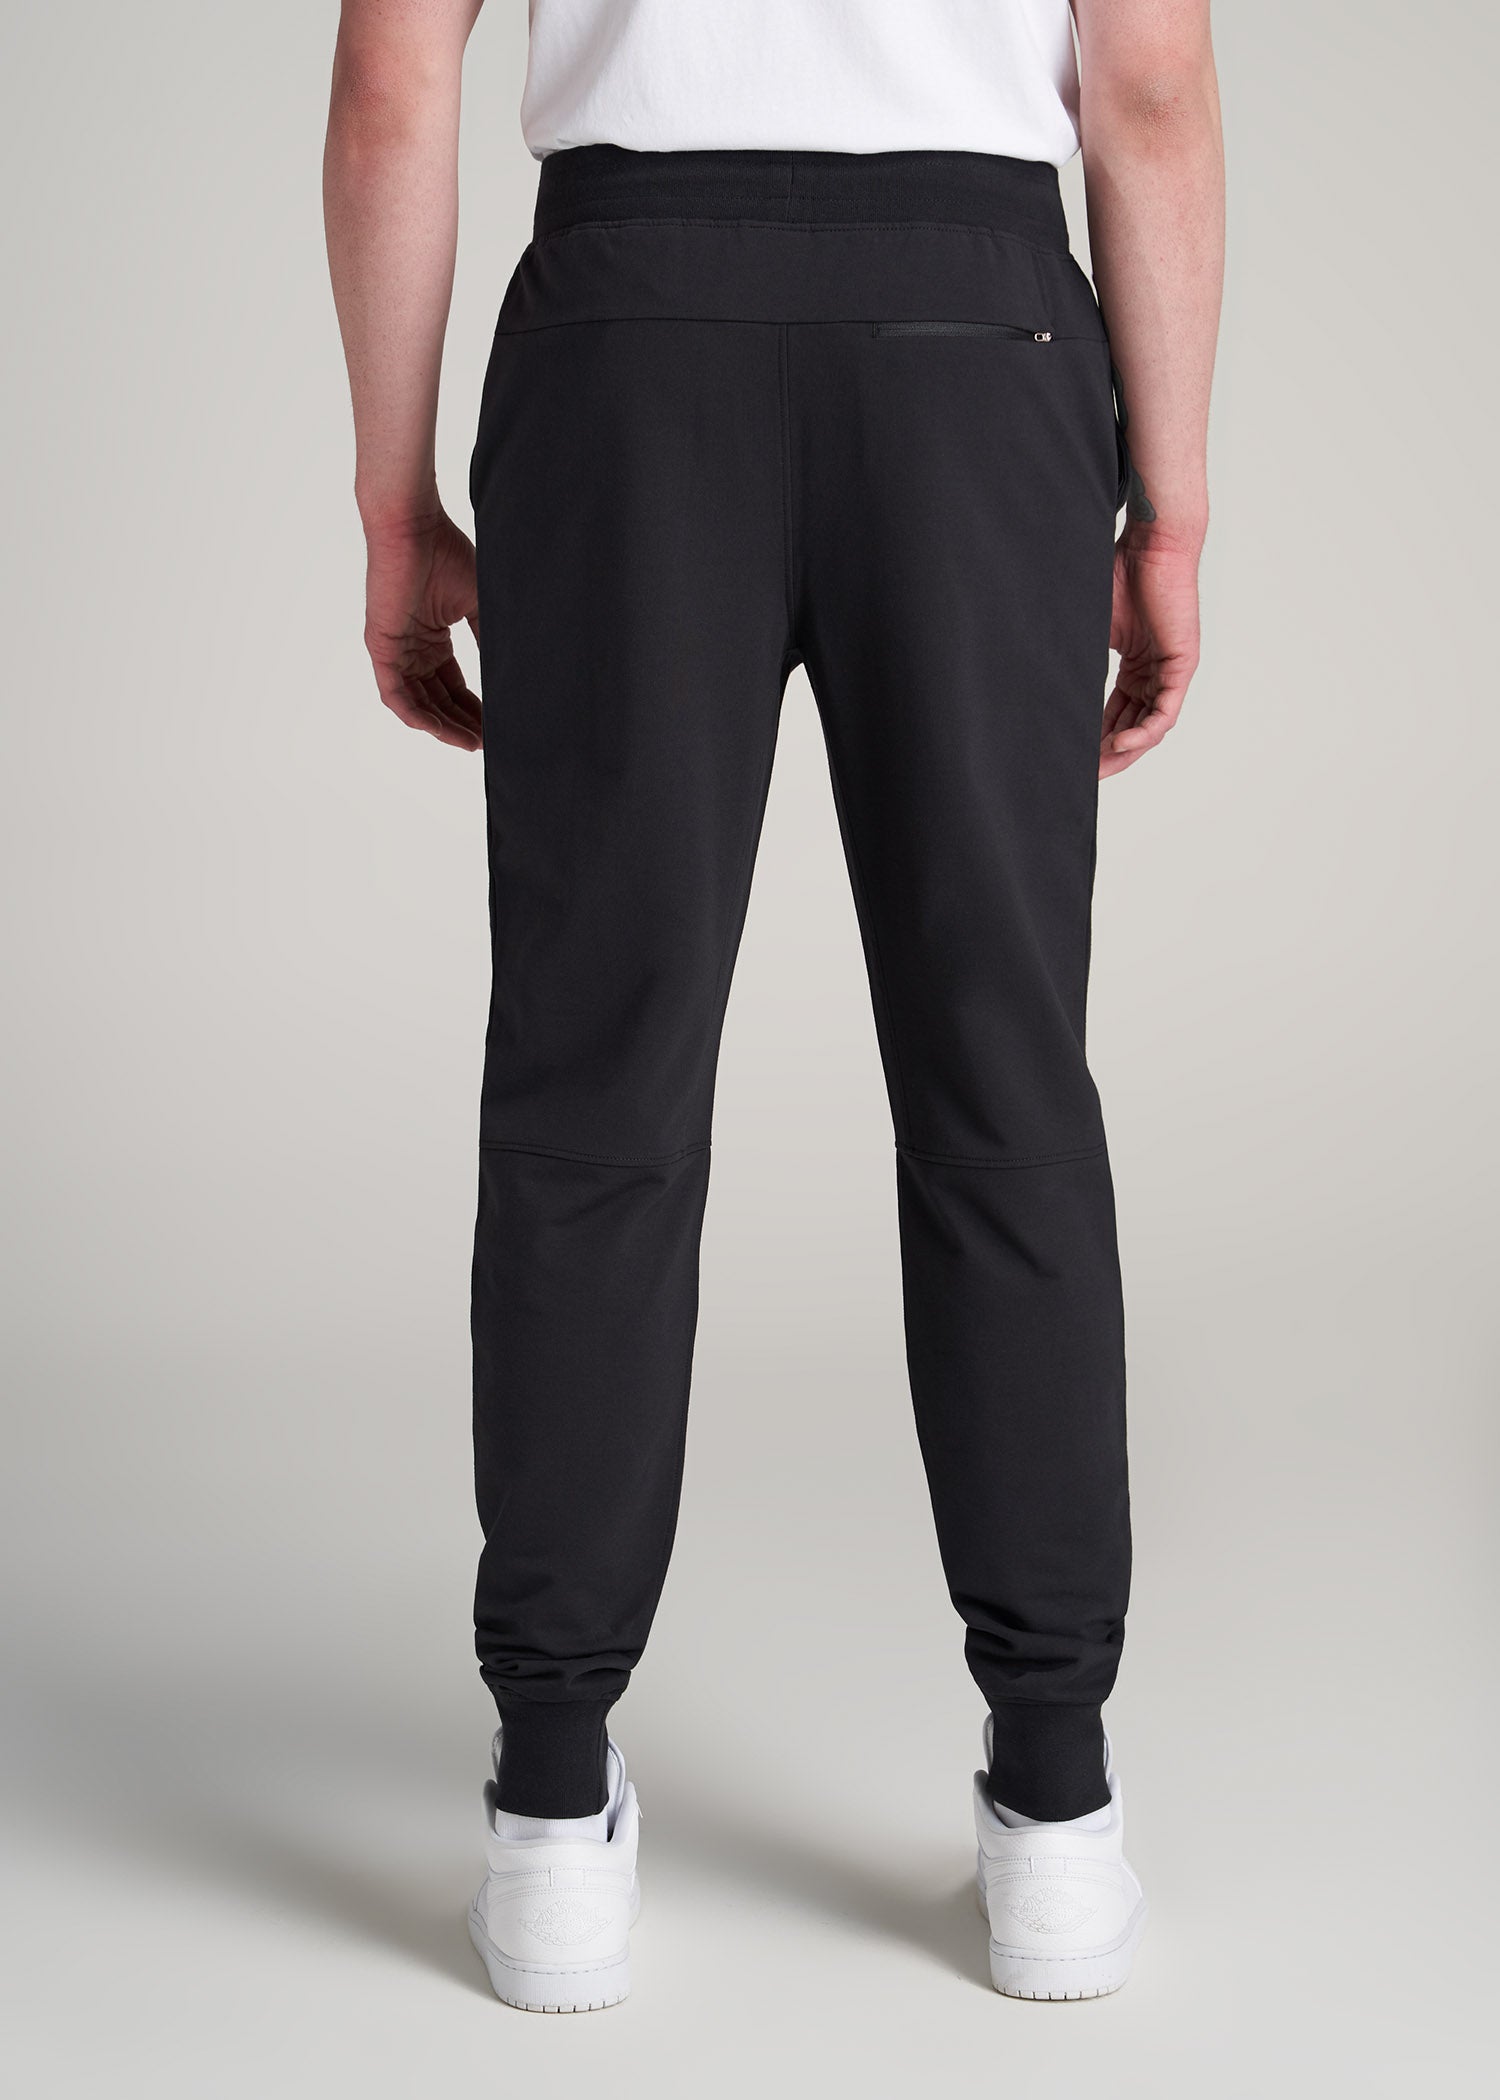 Black Tall A.T. Performance Slim French Terry Joggers